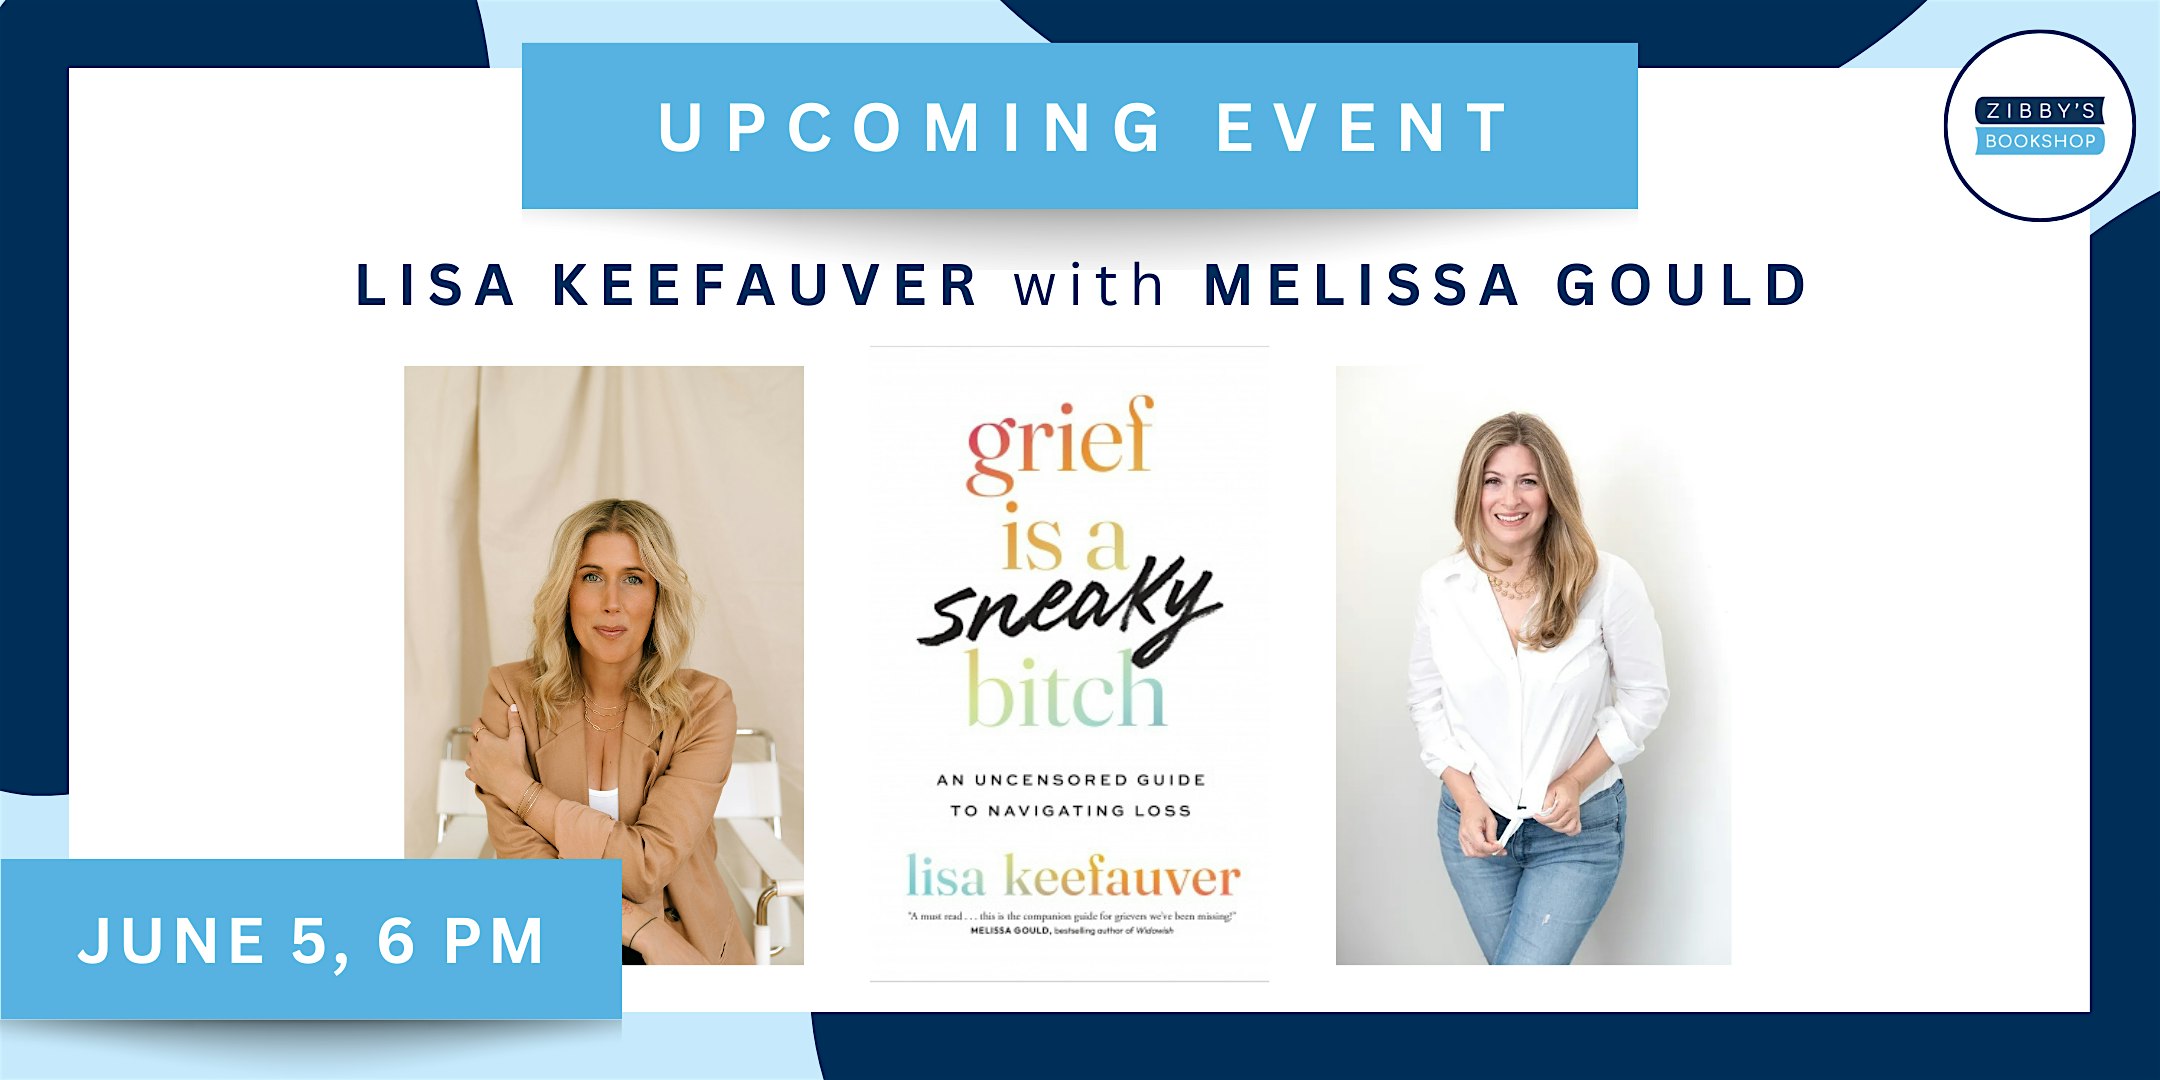 Author event! Lisa Keefauver with Melissa Gould